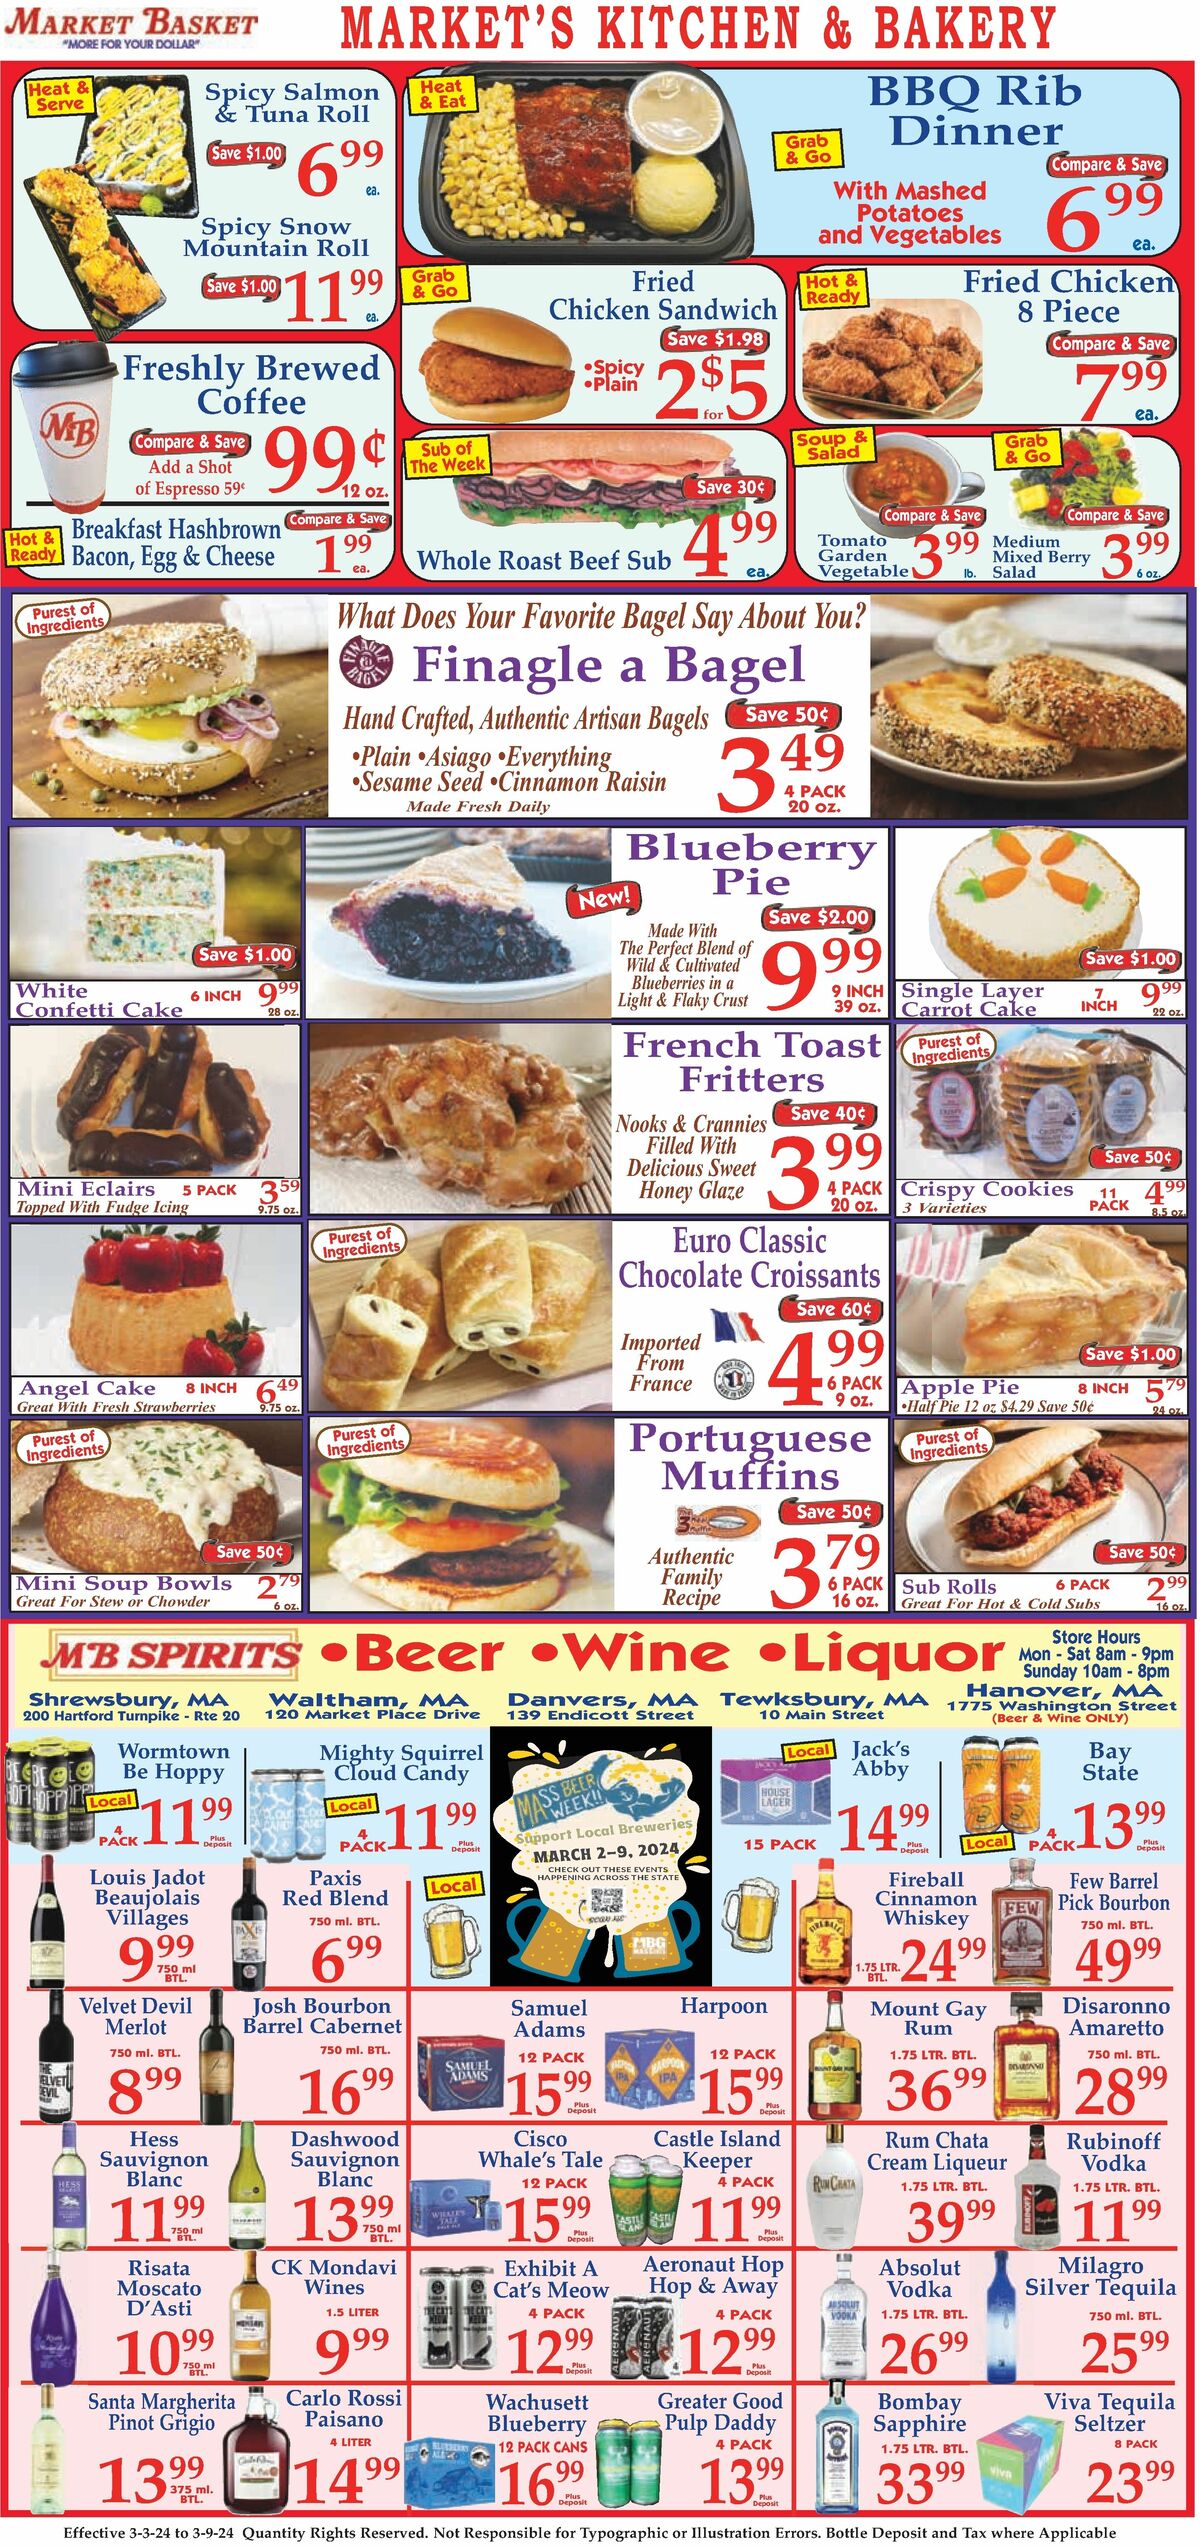 Market Basket Weekly Ad from March 3